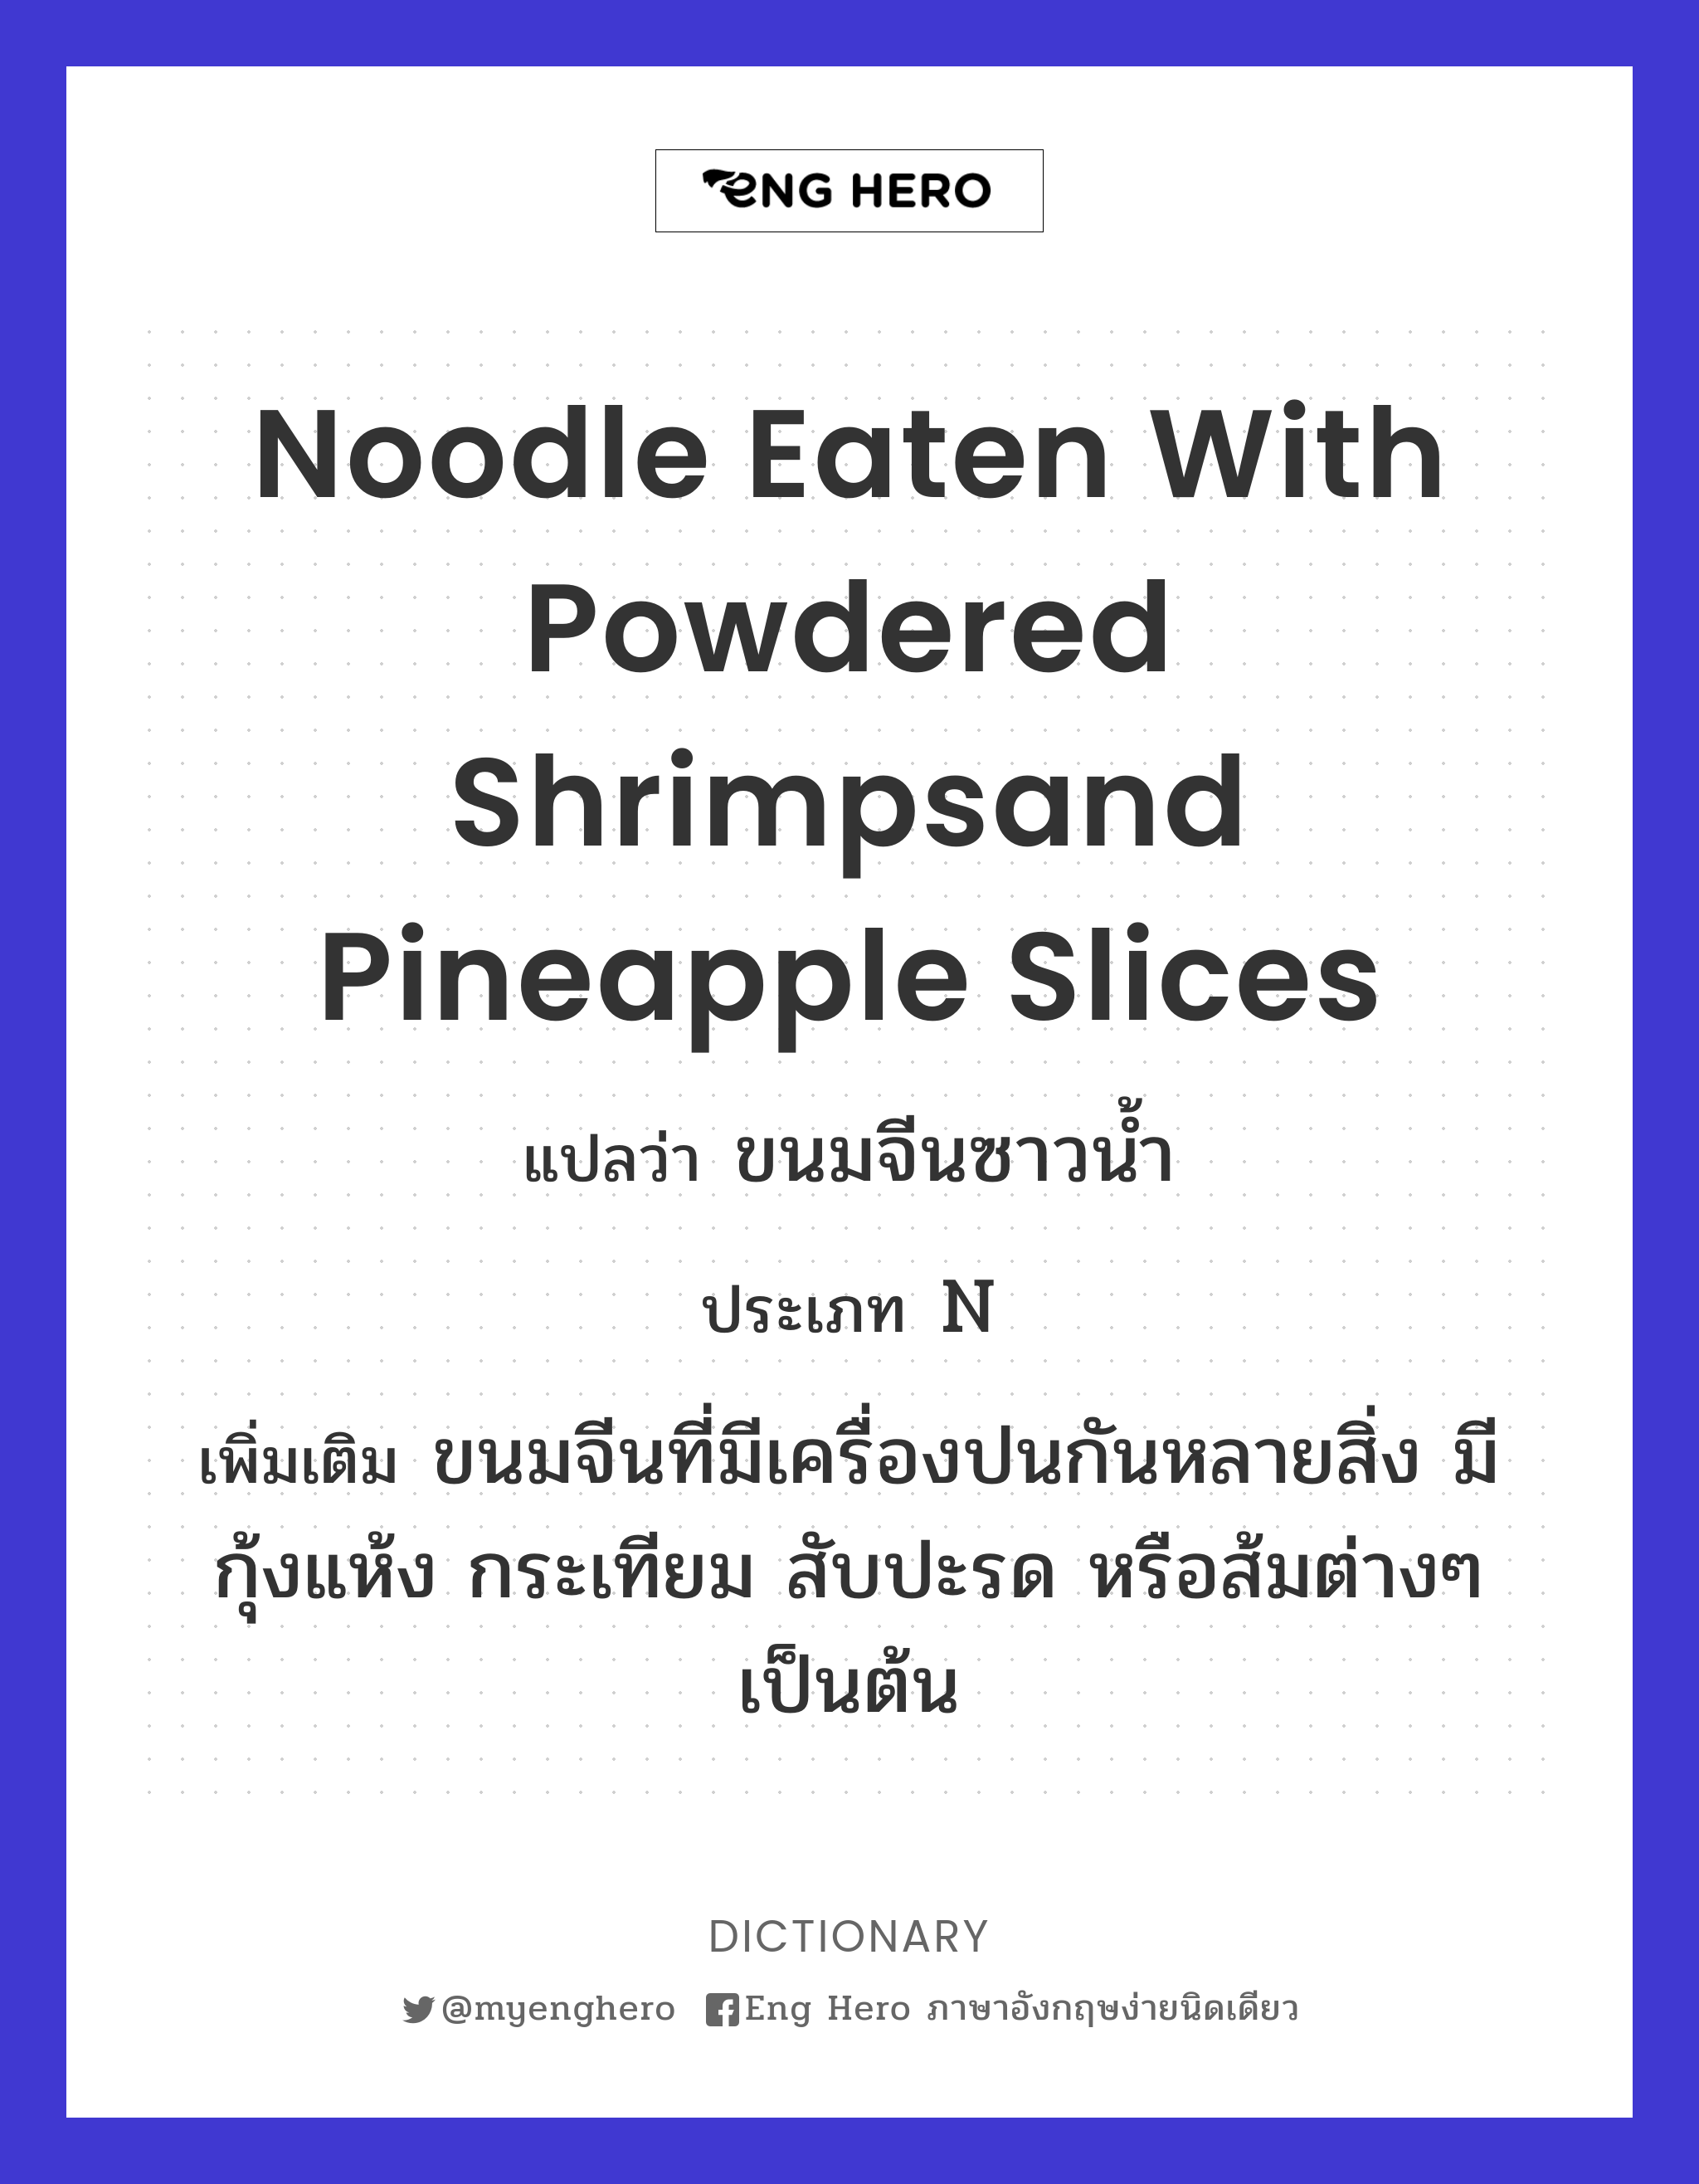 noodle eaten with powdered shrimpsand pineapple slices